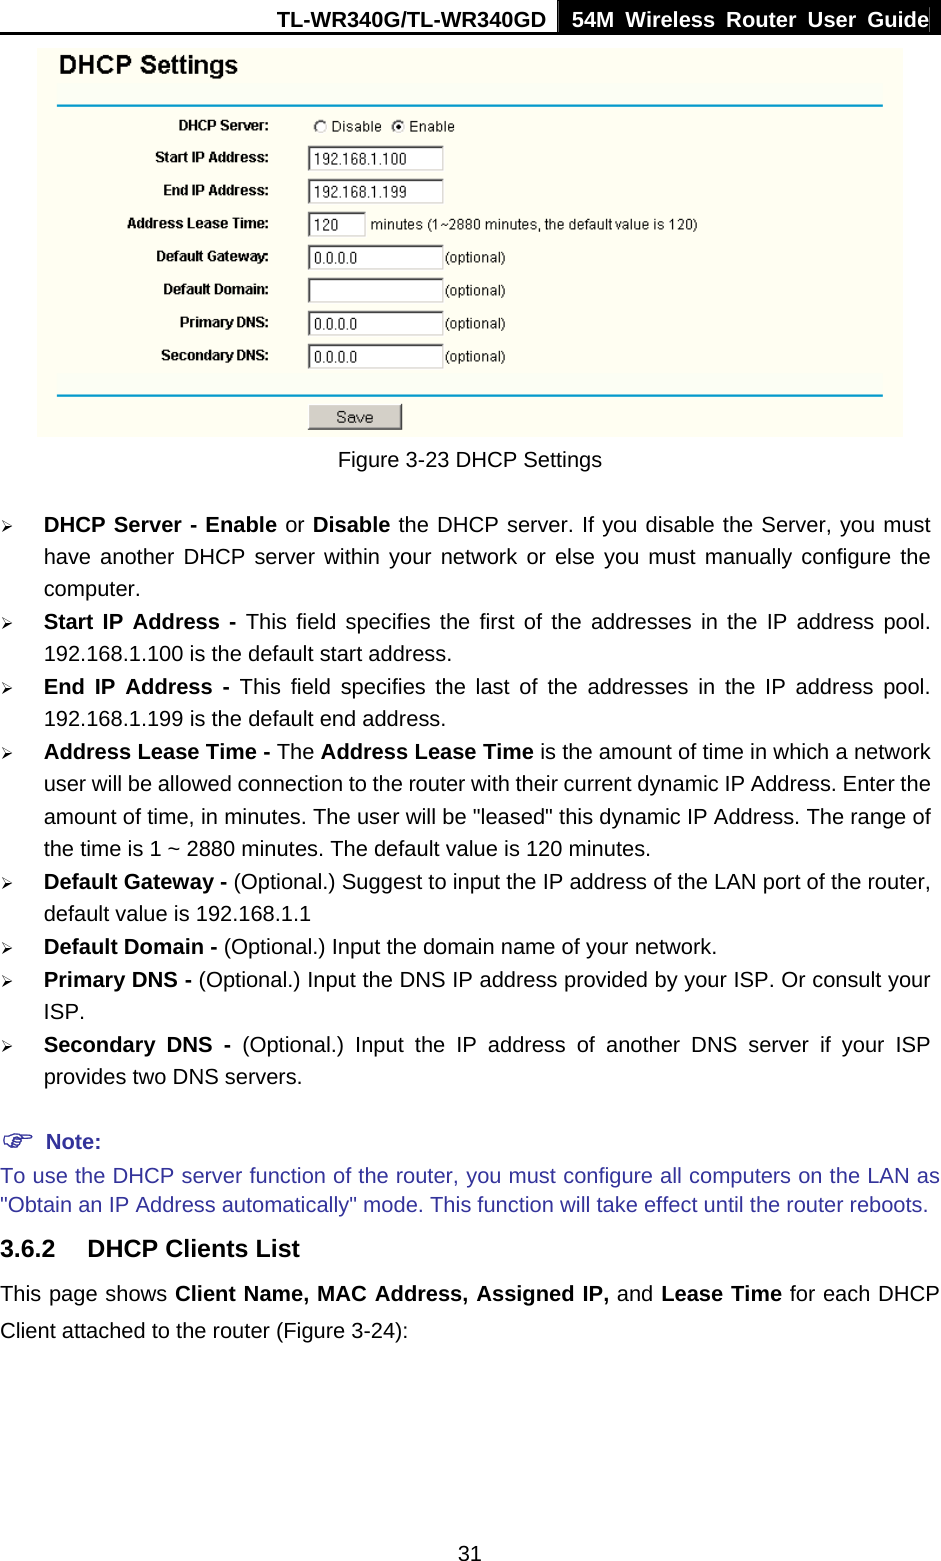 TL-WR340G/TL-WR340GD 54M Wireless Router User Guide  31 Figure 3-23 DHCP Settings ¾ DHCP Server - Enable or Disable the DHCP server. If you disable the Server, you must have another DHCP server within your network or else you must manually configure the computer. ¾ Start IP Address - This field specifies the first of the addresses in the IP address pool. 192.168.1.100 is the default start address. ¾ End IP Address - This field specifies the last of the addresses in the IP address pool. 192.168.1.199 is the default end address. ¾ Address Lease Time - The Address Lease Time is the amount of time in which a network user will be allowed connection to the router with their current dynamic IP Address. Enter the amount of time, in minutes. The user will be &quot;leased&quot; this dynamic IP Address. The range of the time is 1 ~ 2880 minutes. The default value is 120 minutes. ¾ Default Gateway - (Optional.) Suggest to input the IP address of the LAN port of the router, default value is 192.168.1.1 ¾ Default Domain - (Optional.) Input the domain name of your network. ¾ Primary DNS - (Optional.) Input the DNS IP address provided by your ISP. Or consult your ISP. ¾ Secondary DNS - (Optional.) Input the IP address of another DNS server if your ISP provides two DNS servers. ) Note: To use the DHCP server function of the router, you must configure all computers on the LAN as &quot;Obtain an IP Address automatically&quot; mode. This function will take effect until the router reboots. 3.6.2  DHCP Clients List This page shows Client Name, MAC Address, Assigned IP, and Lease Time for each DHCP Client attached to the router (Figure 3-24): 